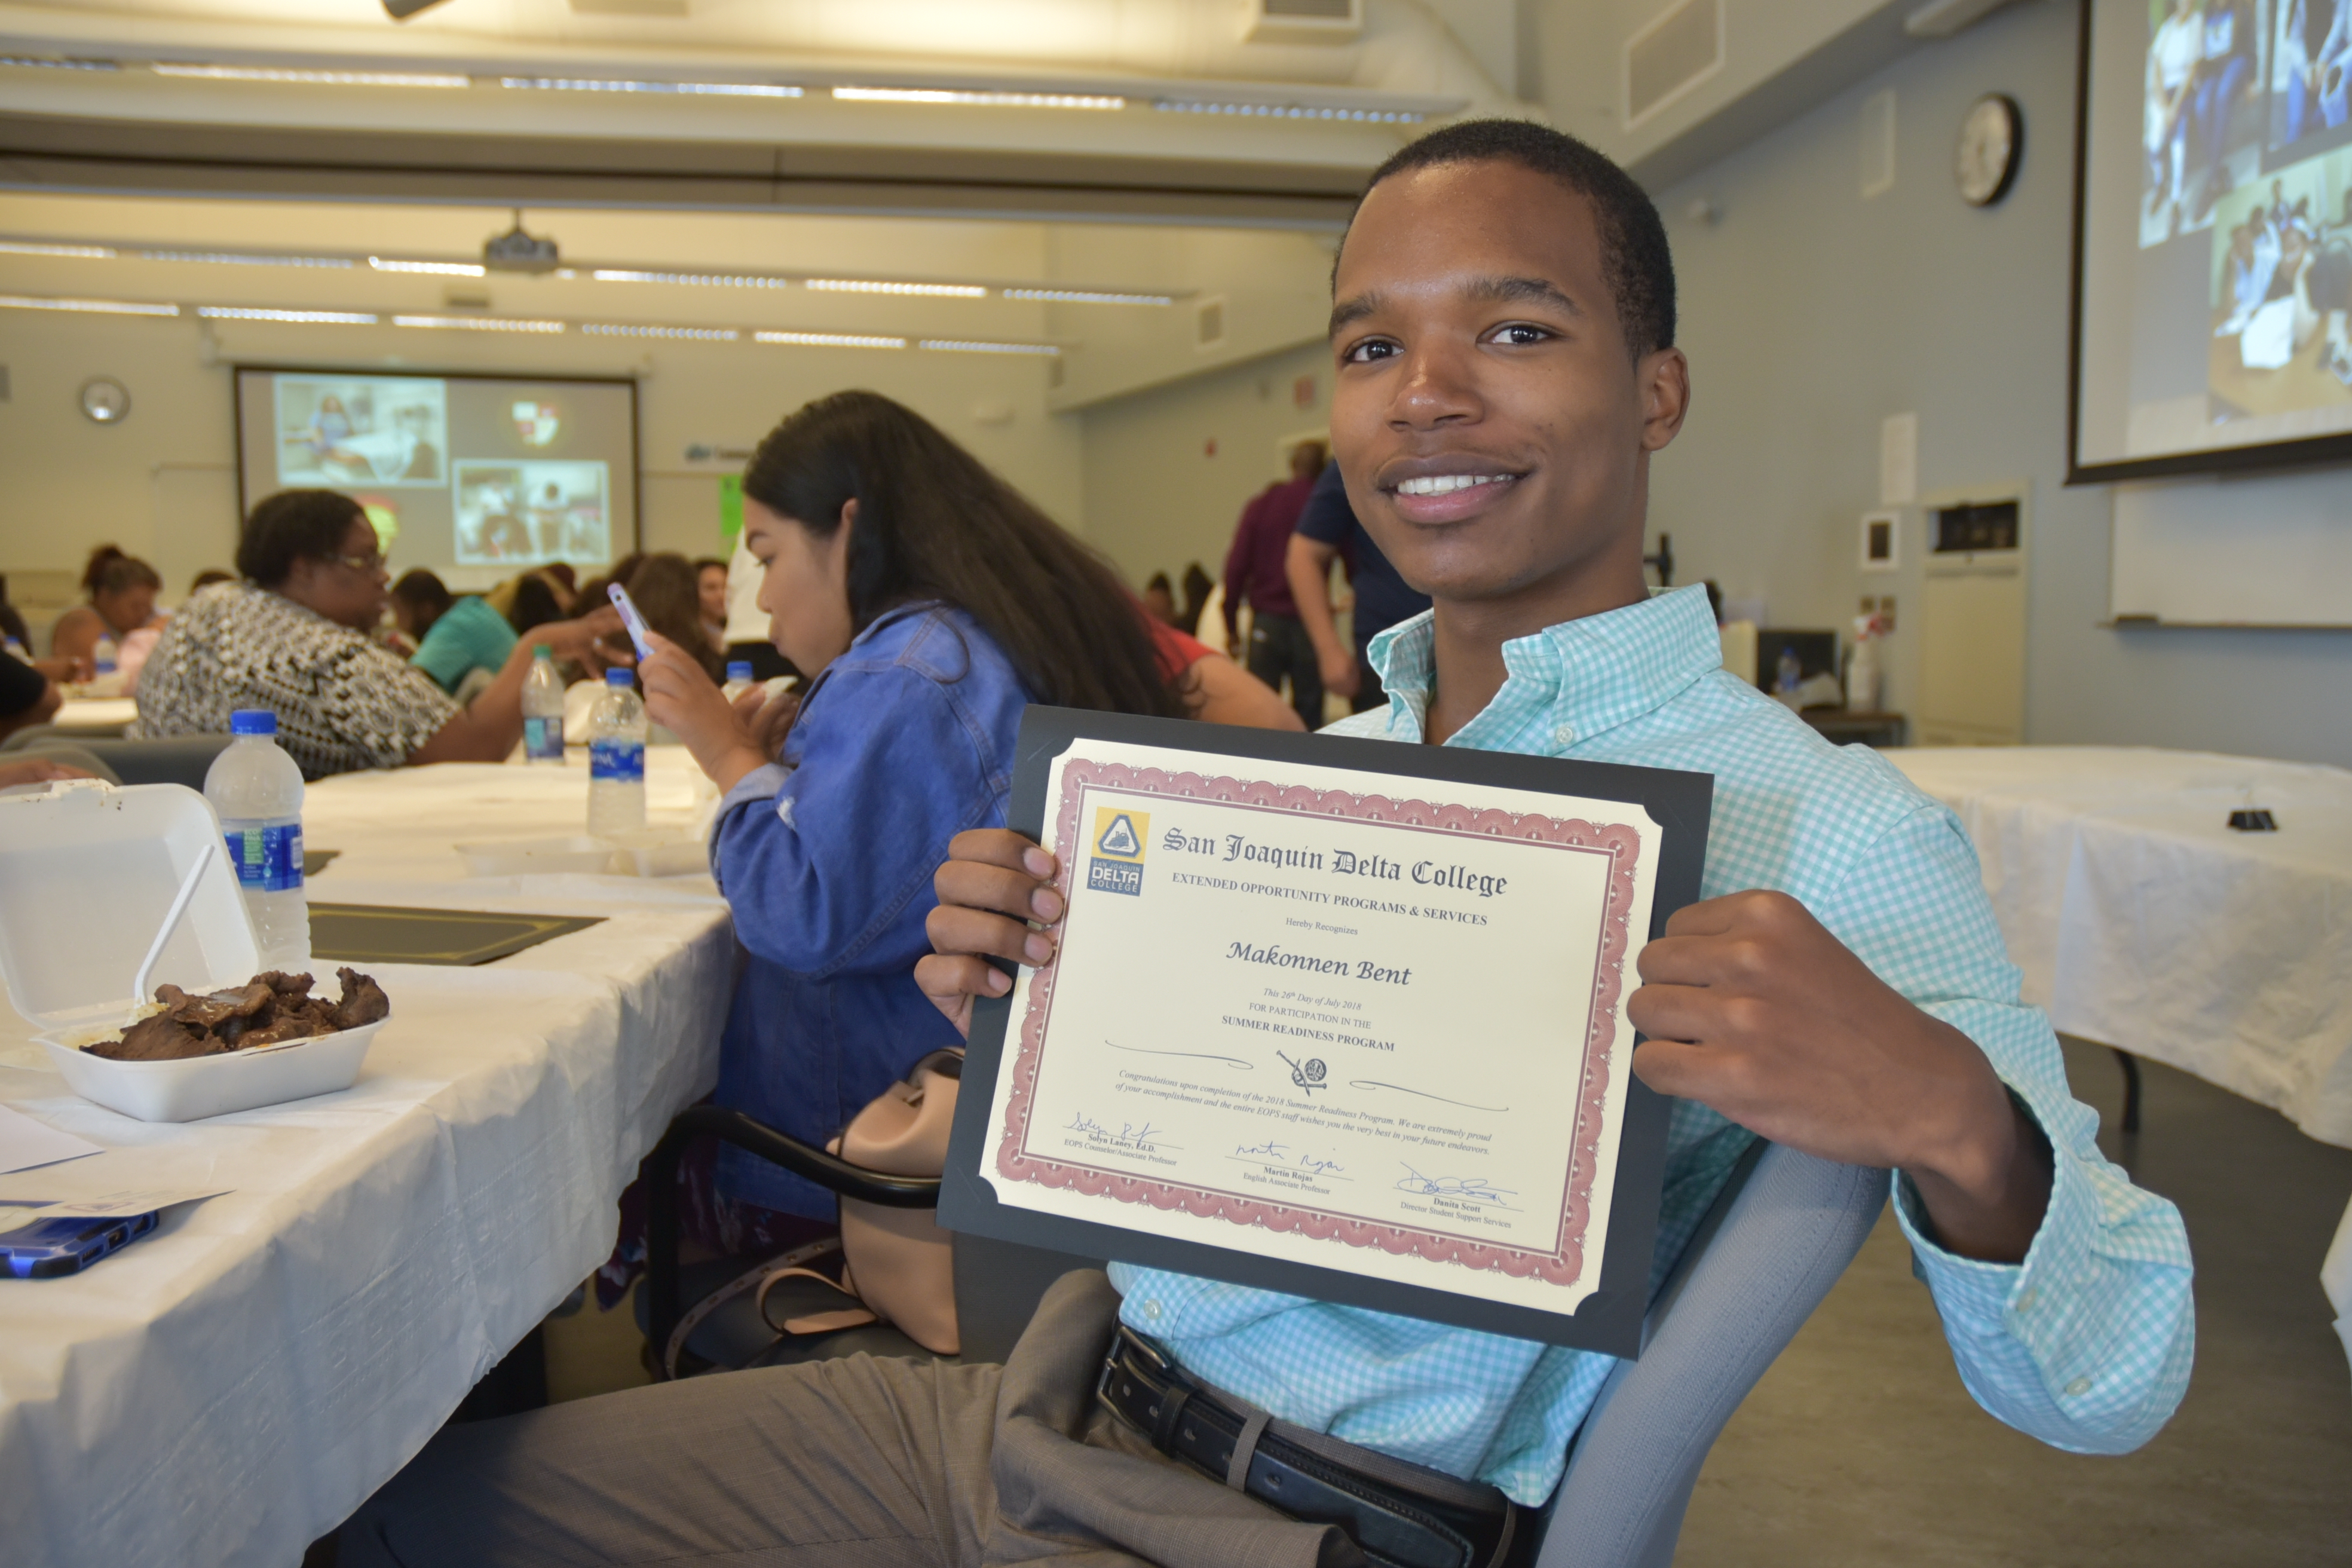 Makonnen Bent is one of about 50 studnets to finish San Joaquin Delta College's EOPS summer readiness program.